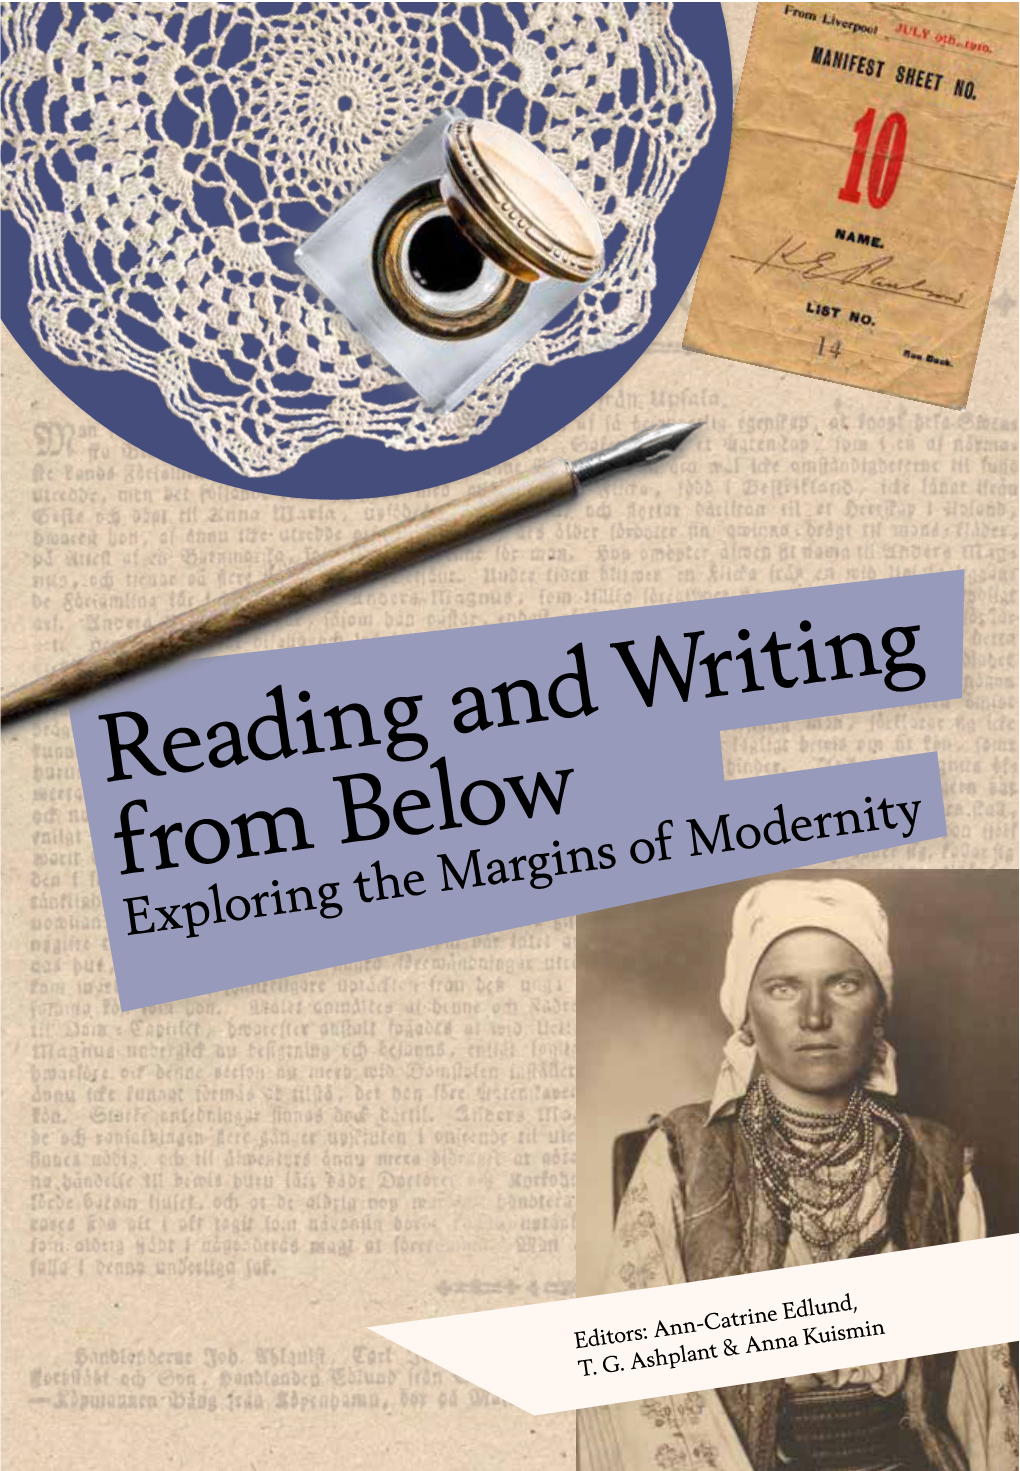 Reading and Writing from Below Exploring the Margins of Modernity